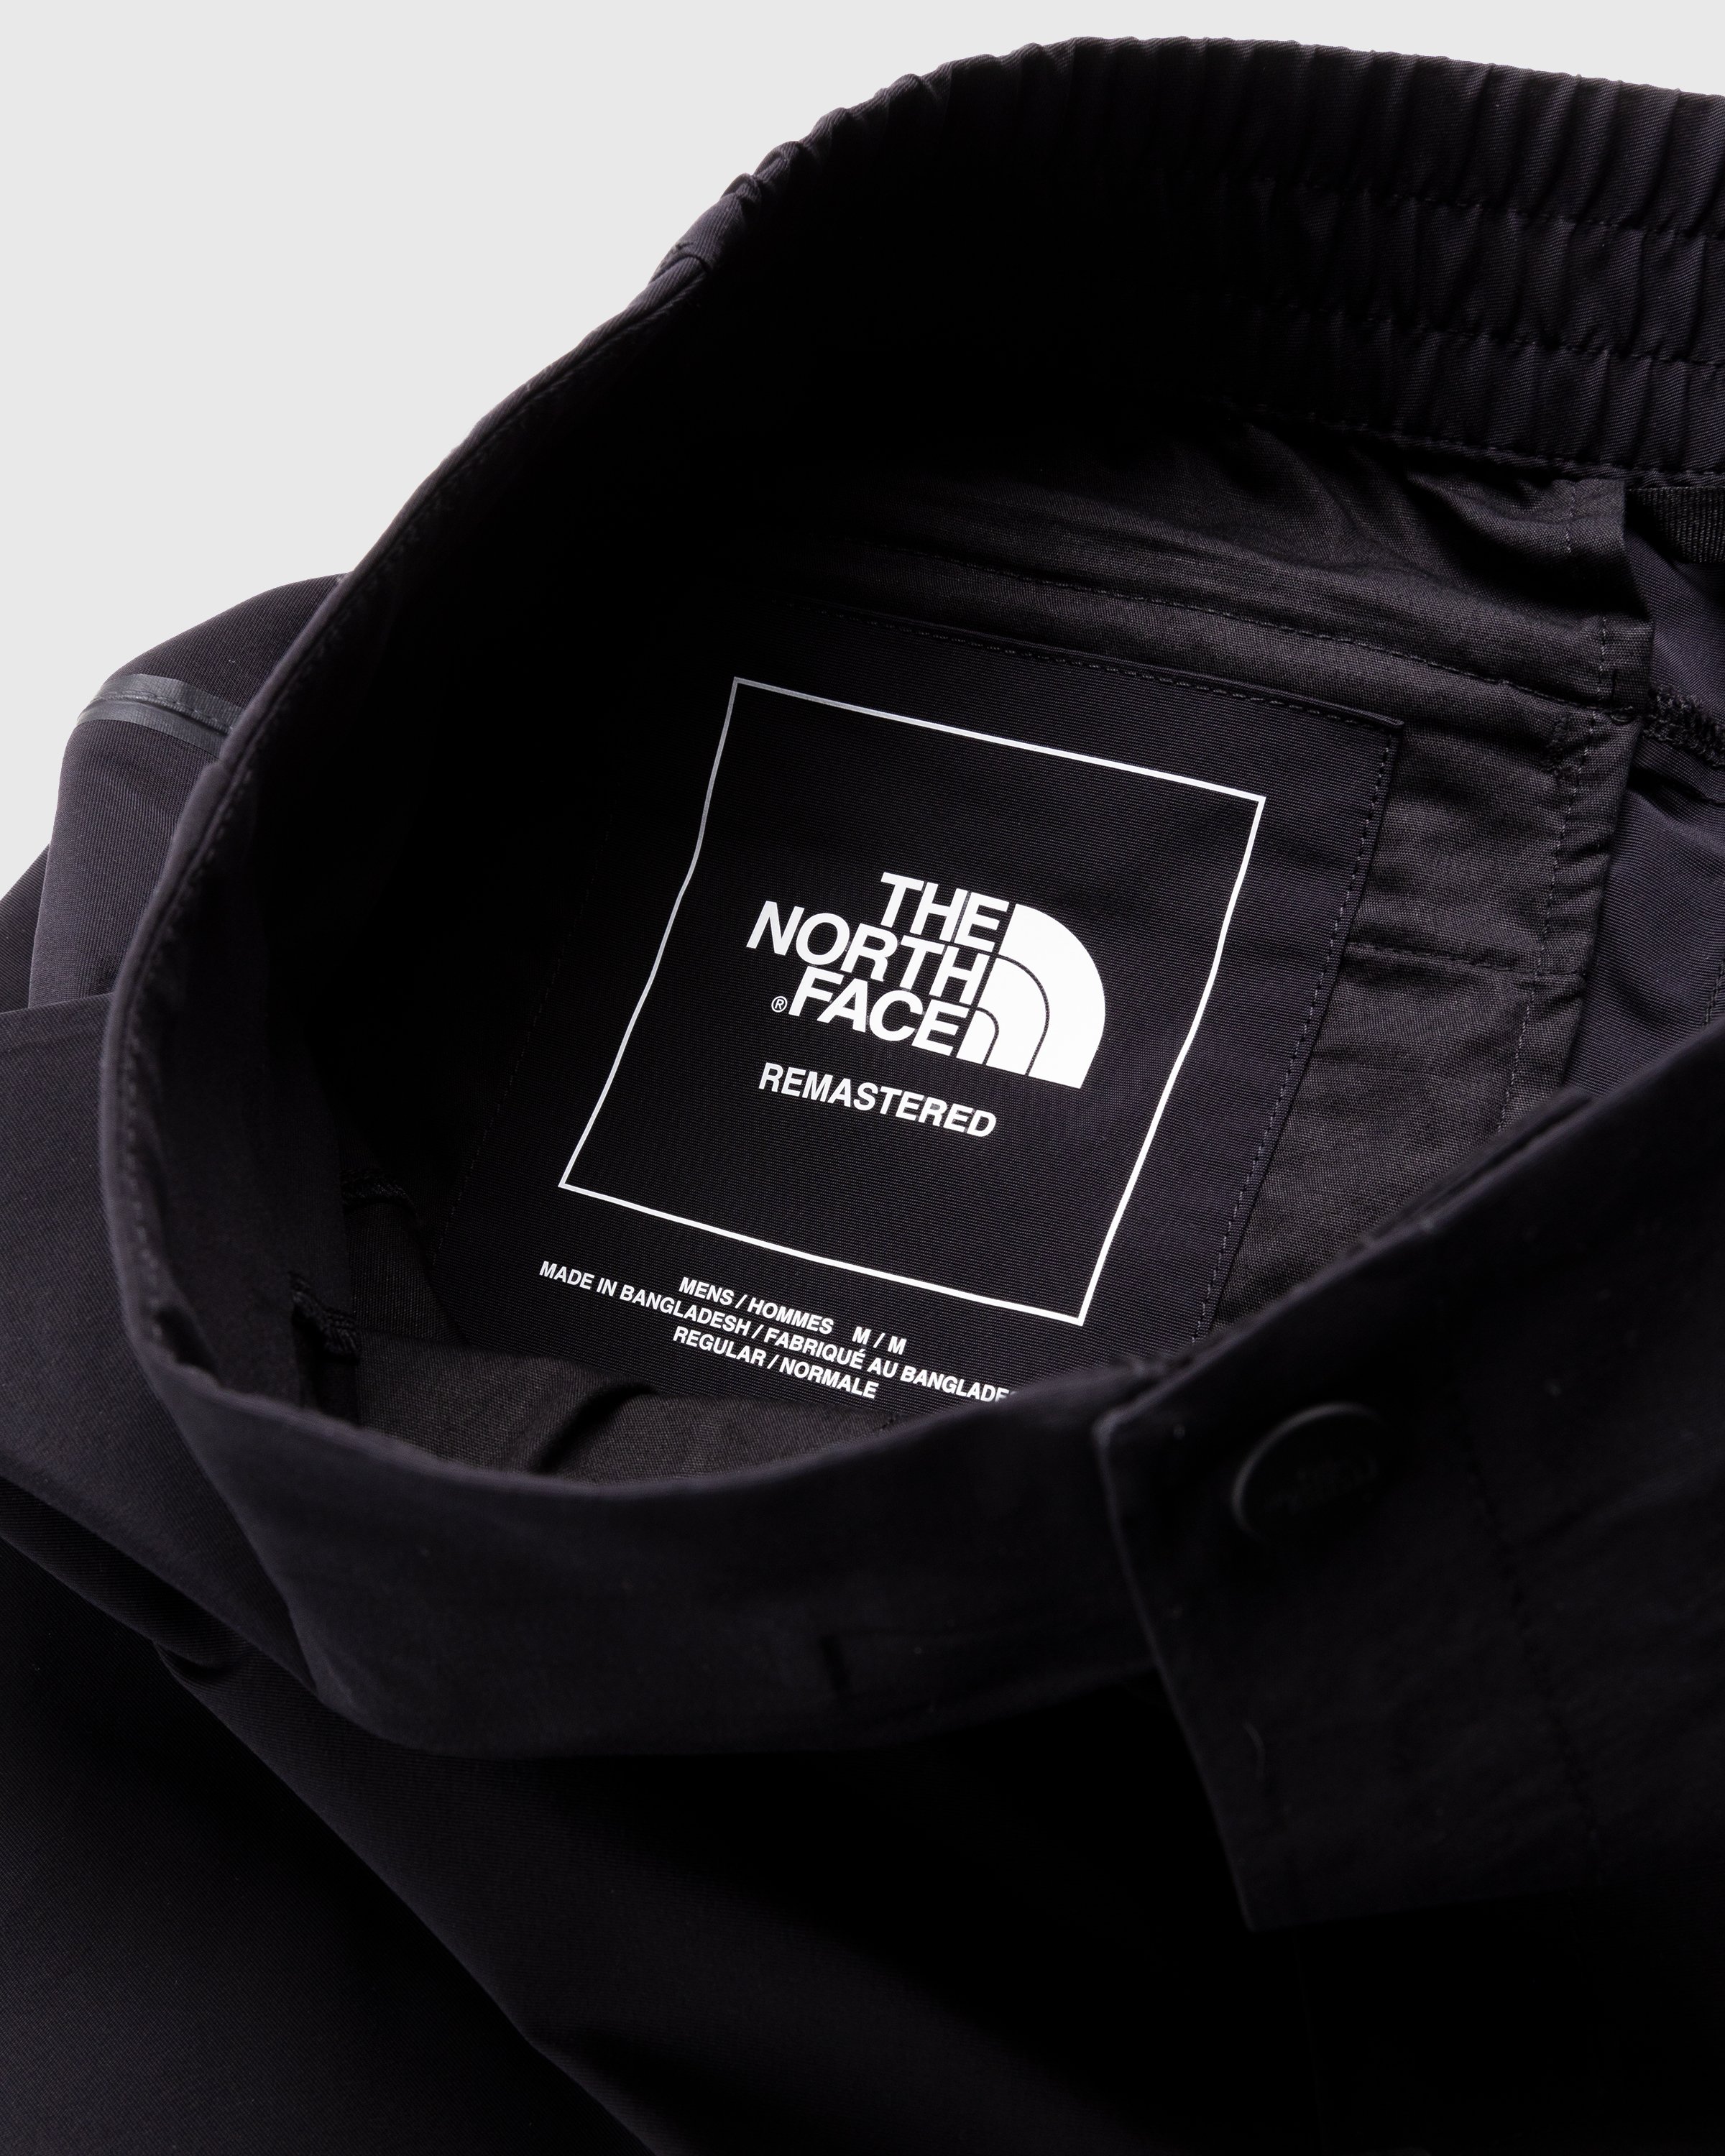 The North Face - RMST Mountain Pant Black - Clothing - Black - Image 4